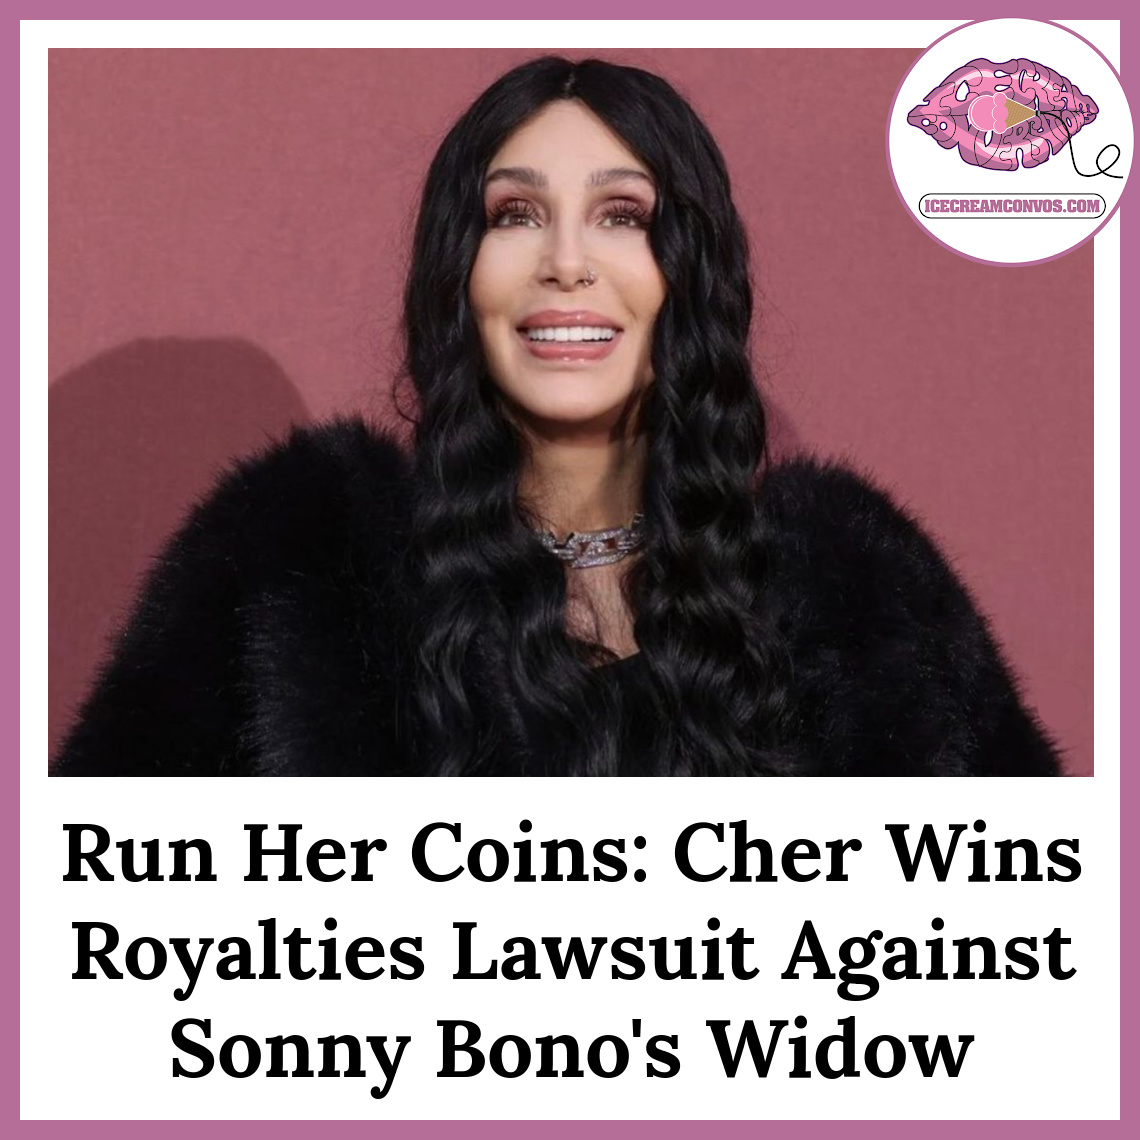 Cher emerged victorious in her royalties lawsuit against Sonny Bono's widow, Mary Bono. Now, she is set to receive over $400K! ⚖️🎉🖤🍦 bit.ly/3X2HFq4

#Cher #SonnyBono #MaryBono #Royalties #Lawsuits #IceCreamConvos